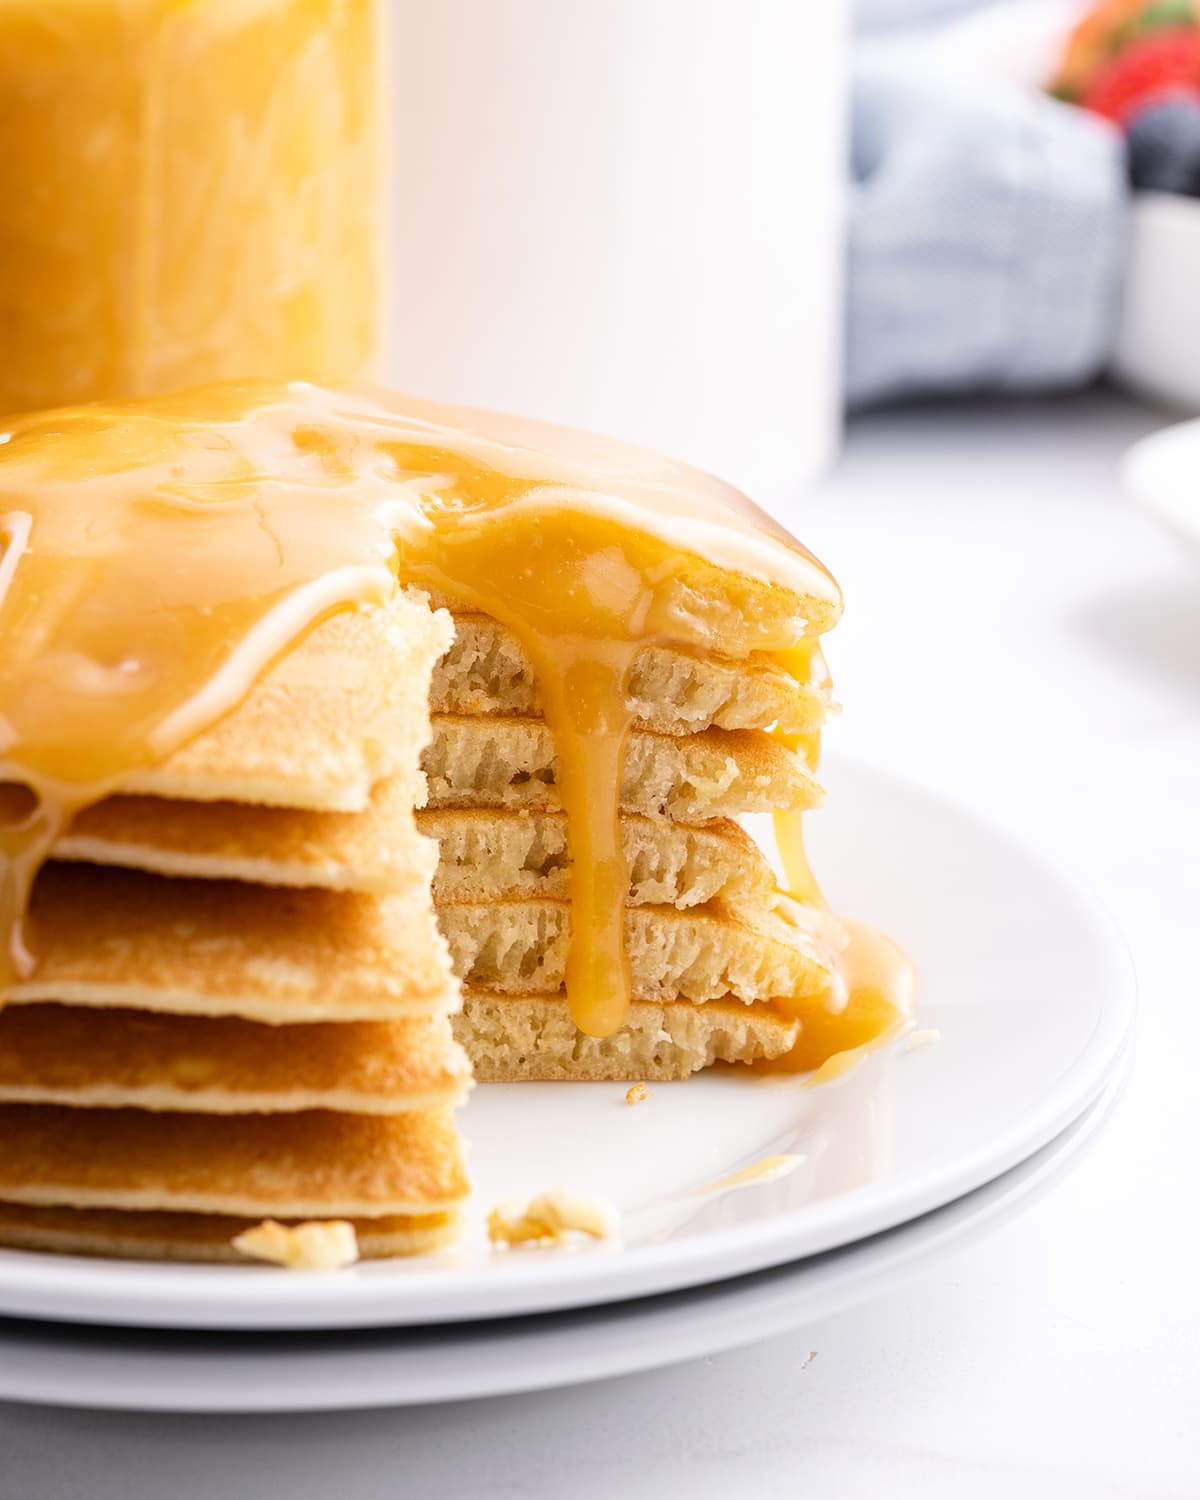 A stack of pancakes with buttermilk syrup on top, with bites cut out showing the middle of the pancakes.